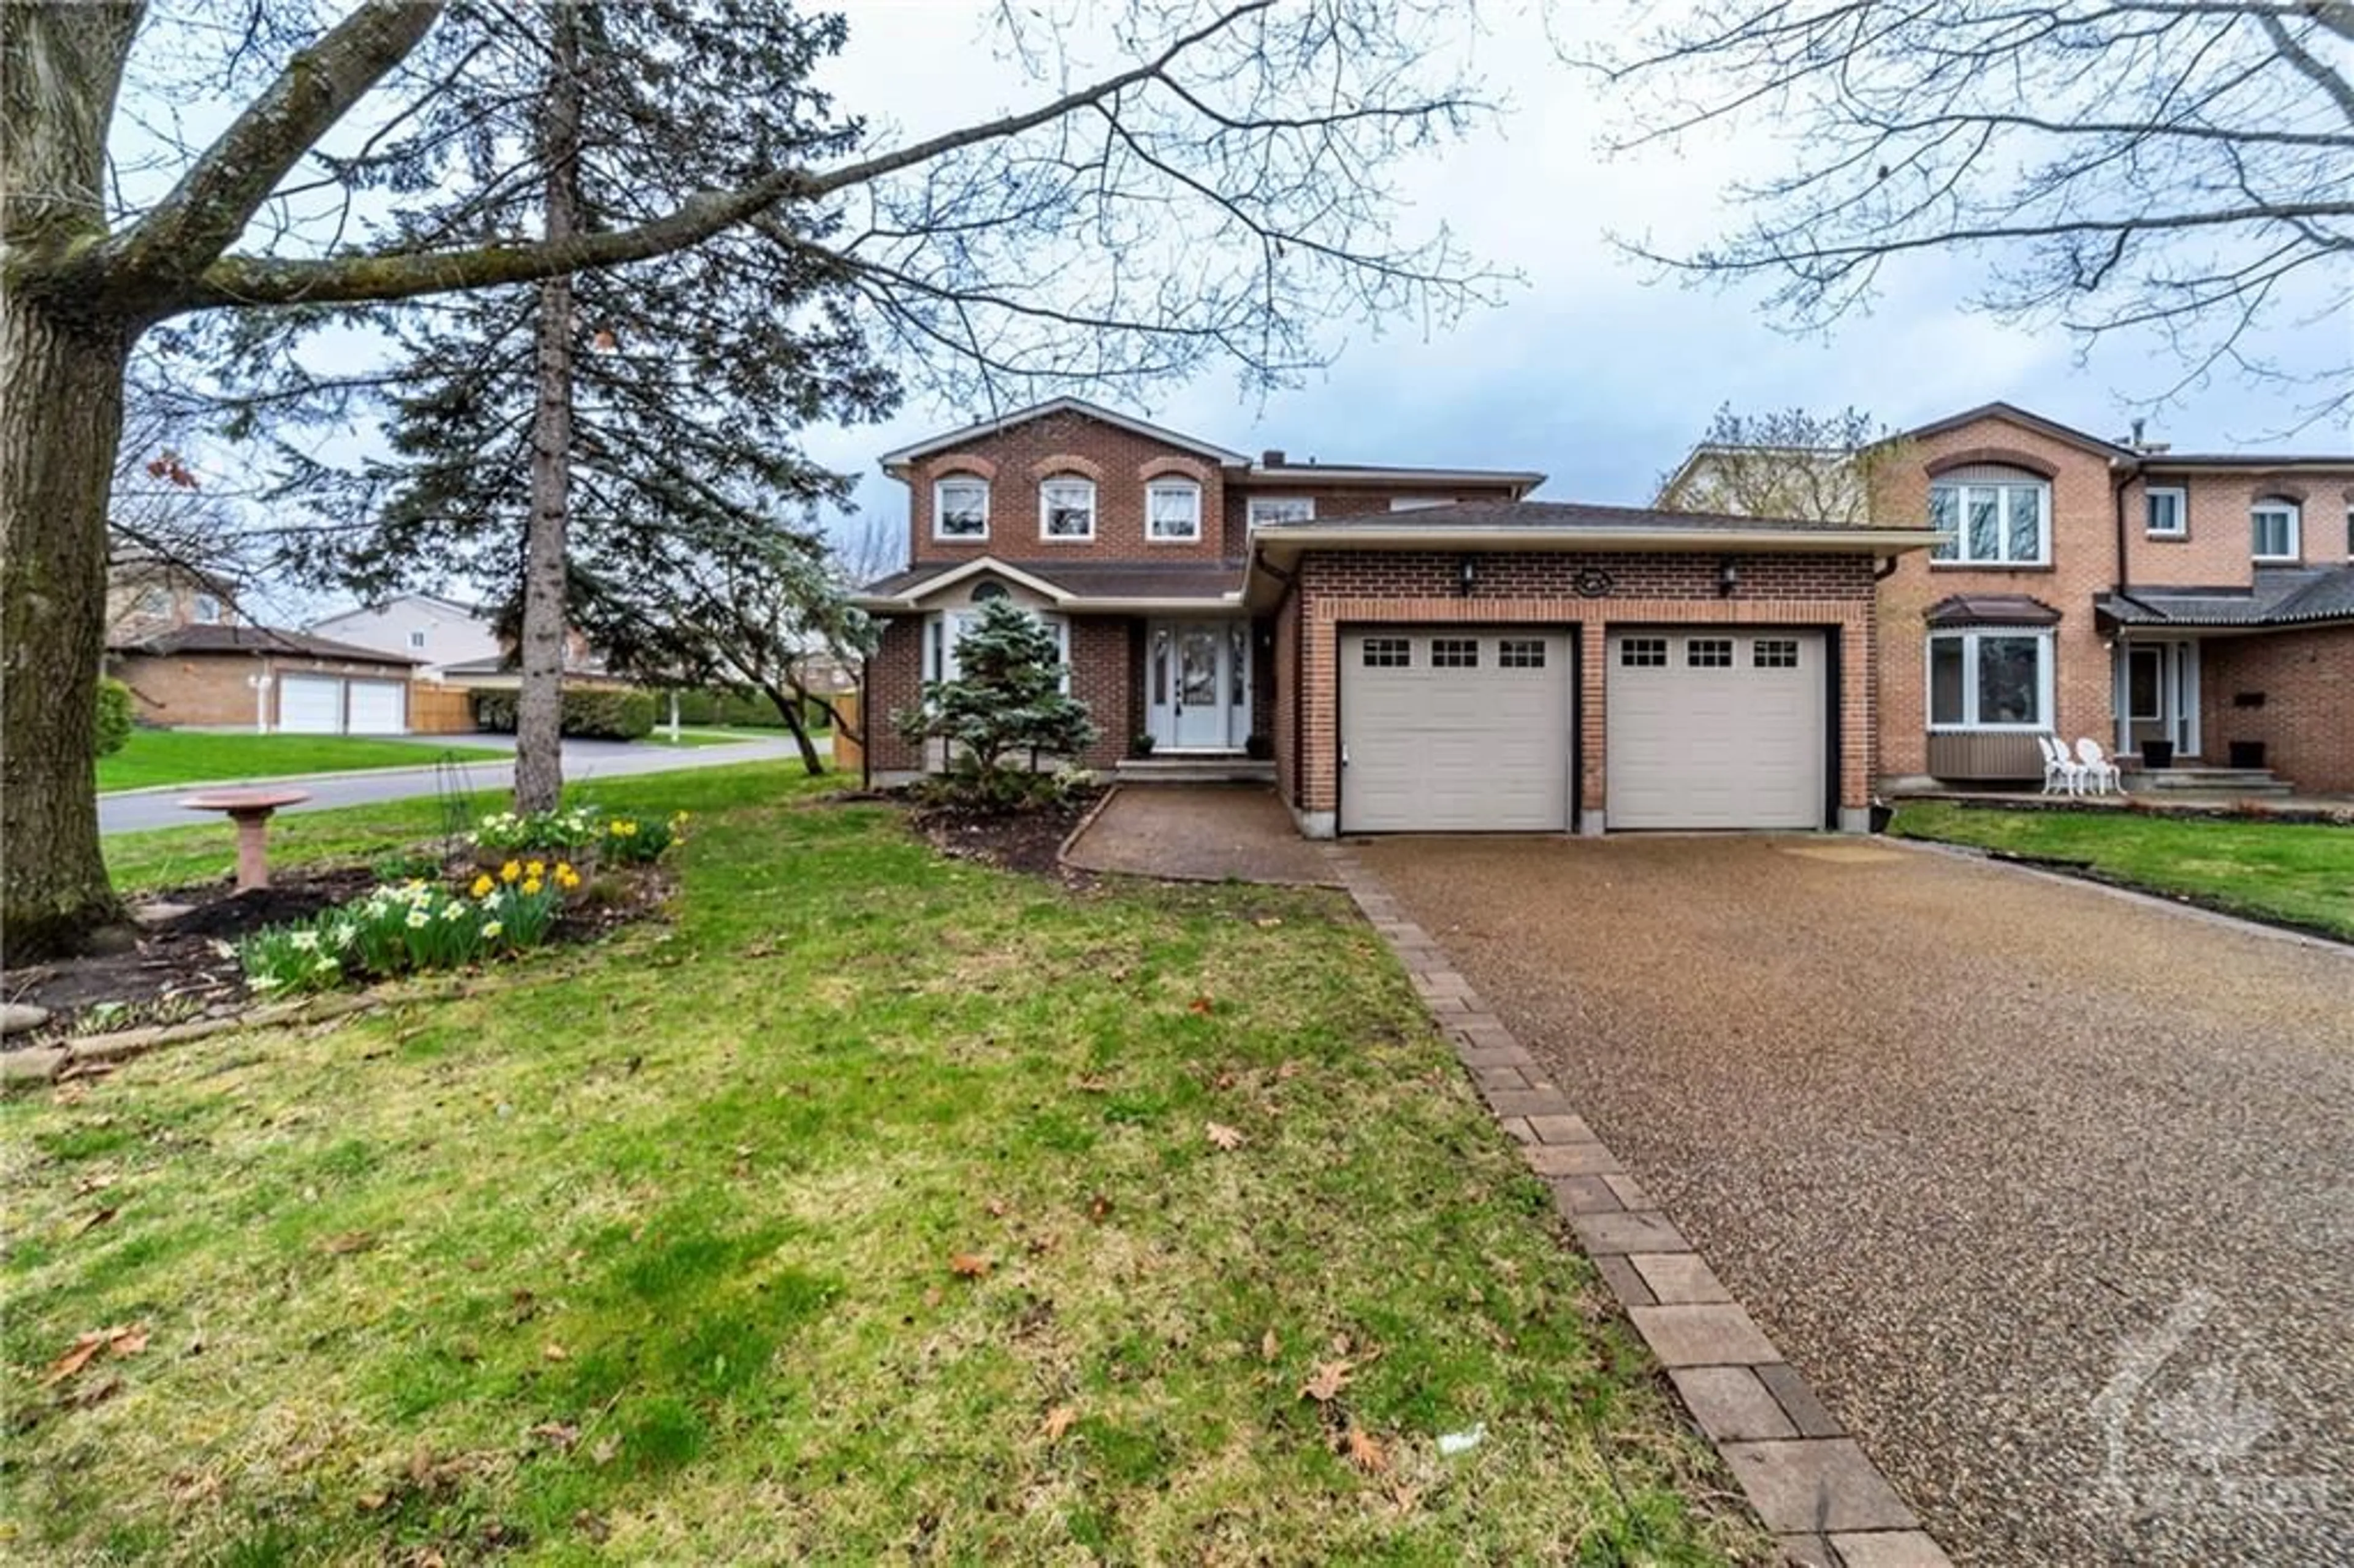 Home with brick exterior material for 969 TERRANOVA Dr, Orleans Ontario K1C 5M3